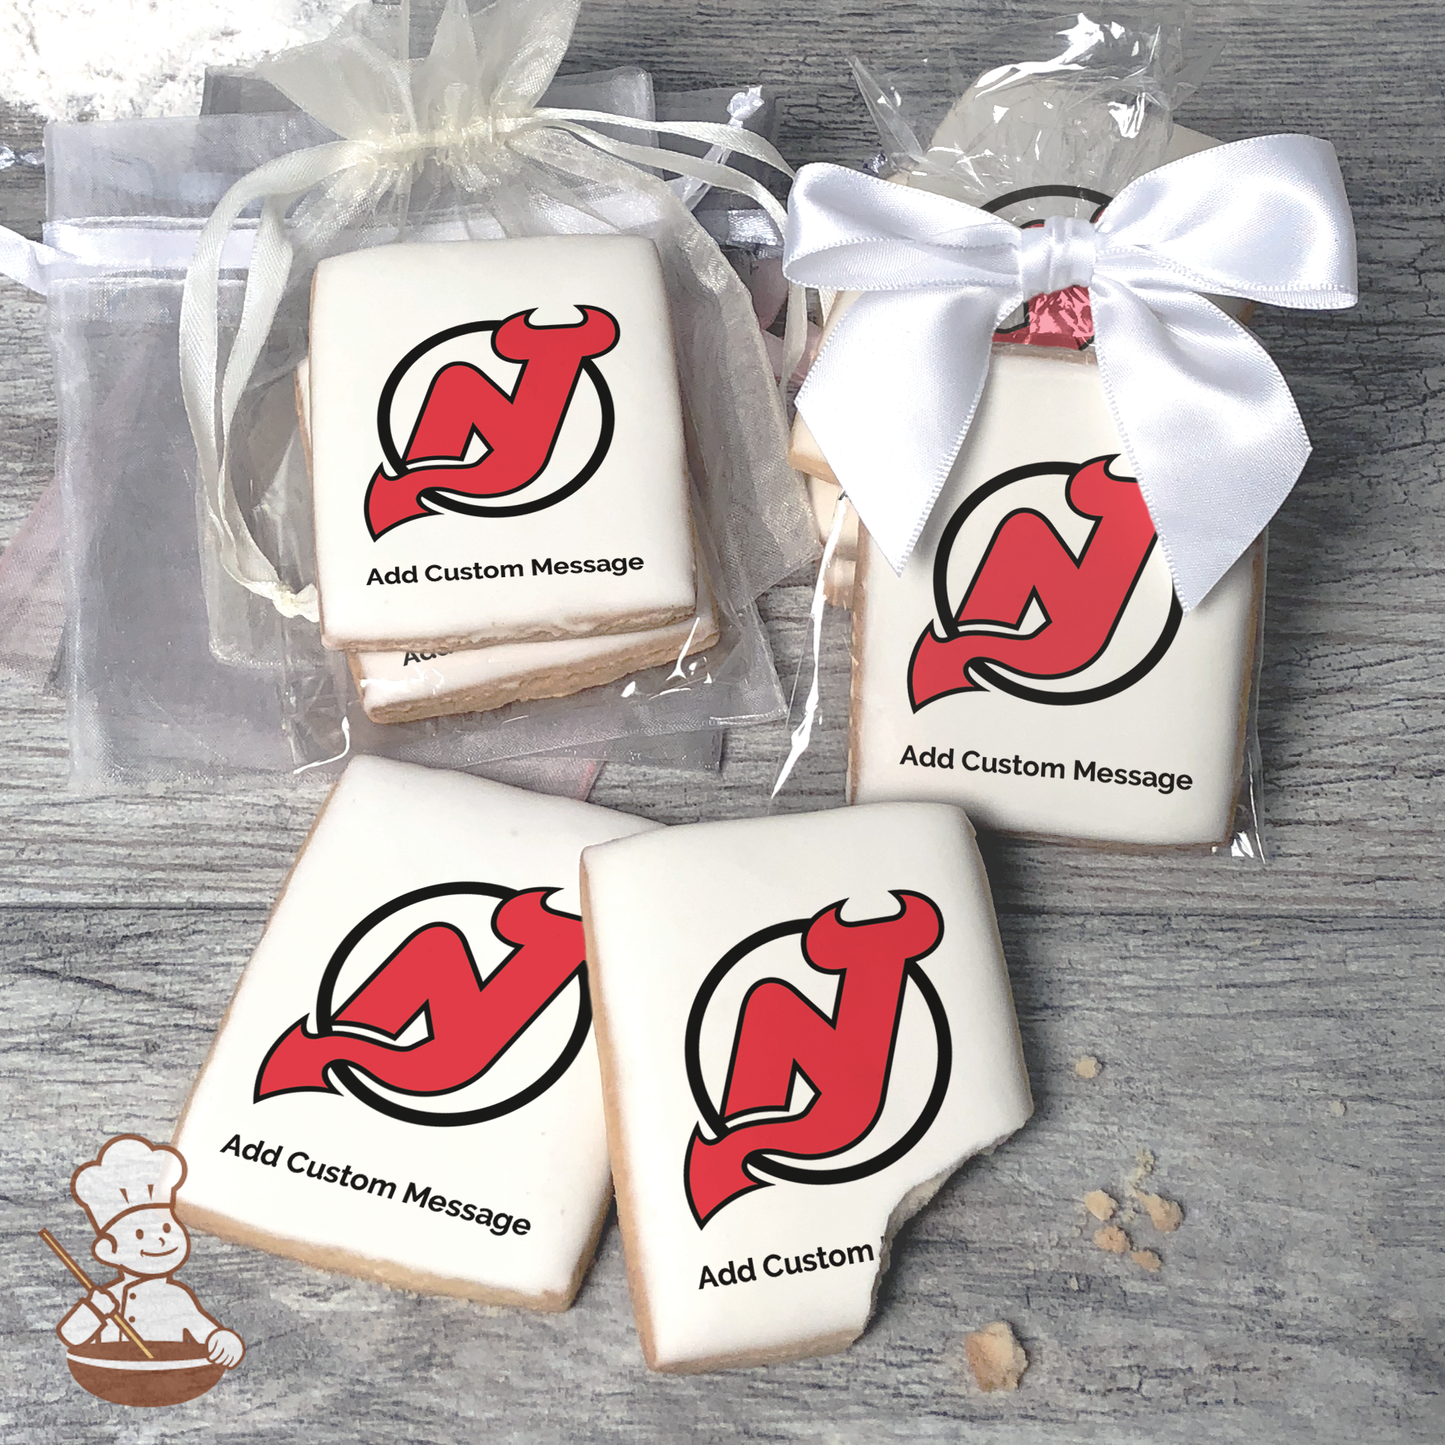 NHL New Jersey Devils Custom Message Cookies (Rectangle)